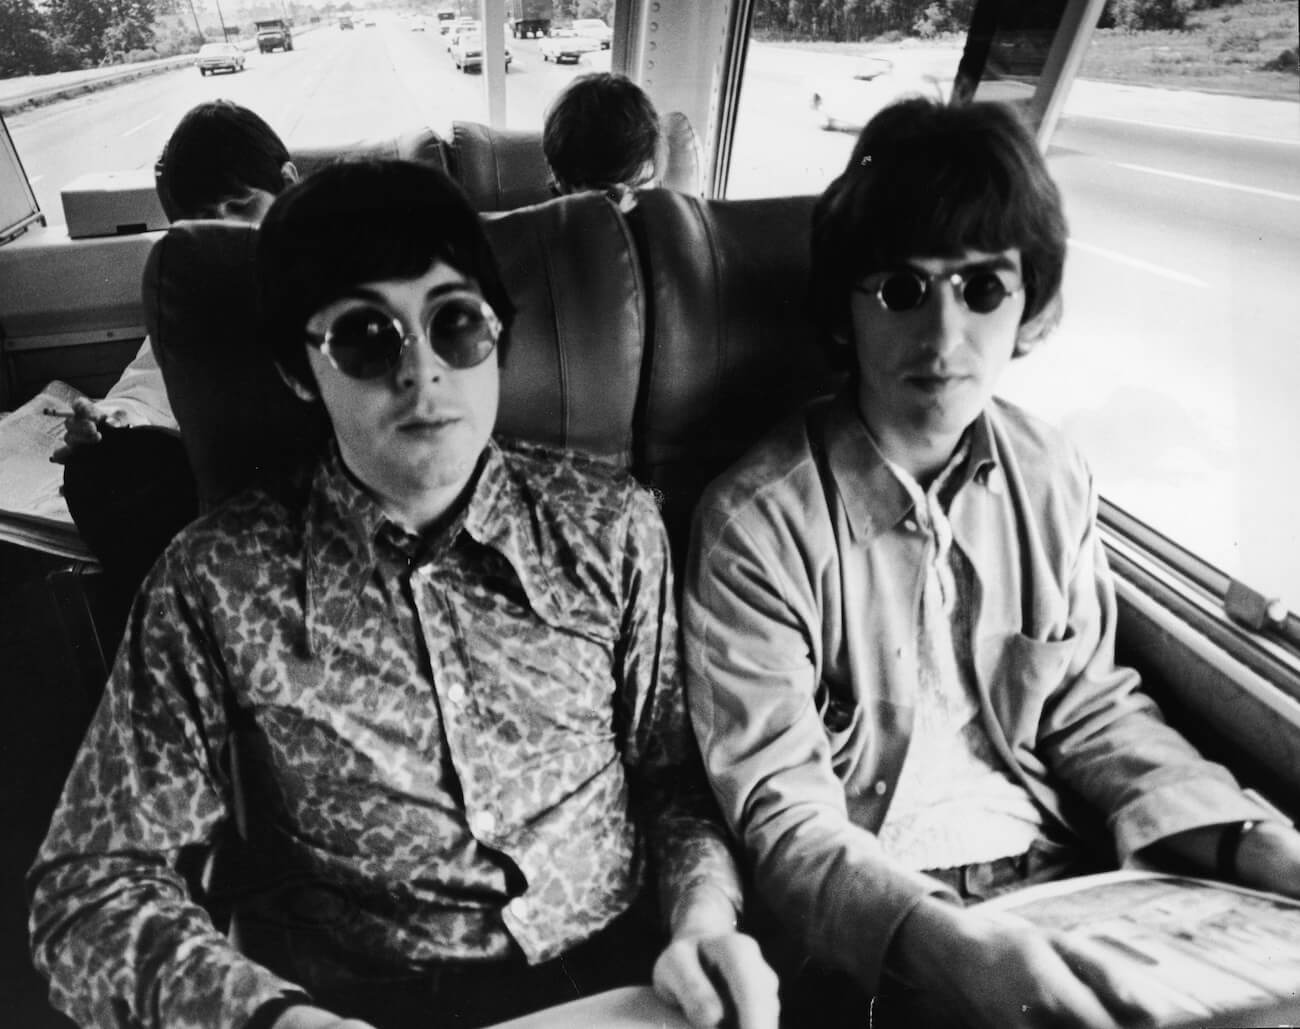 George Harrison and Paul McCartney on a tour bus in 1966.